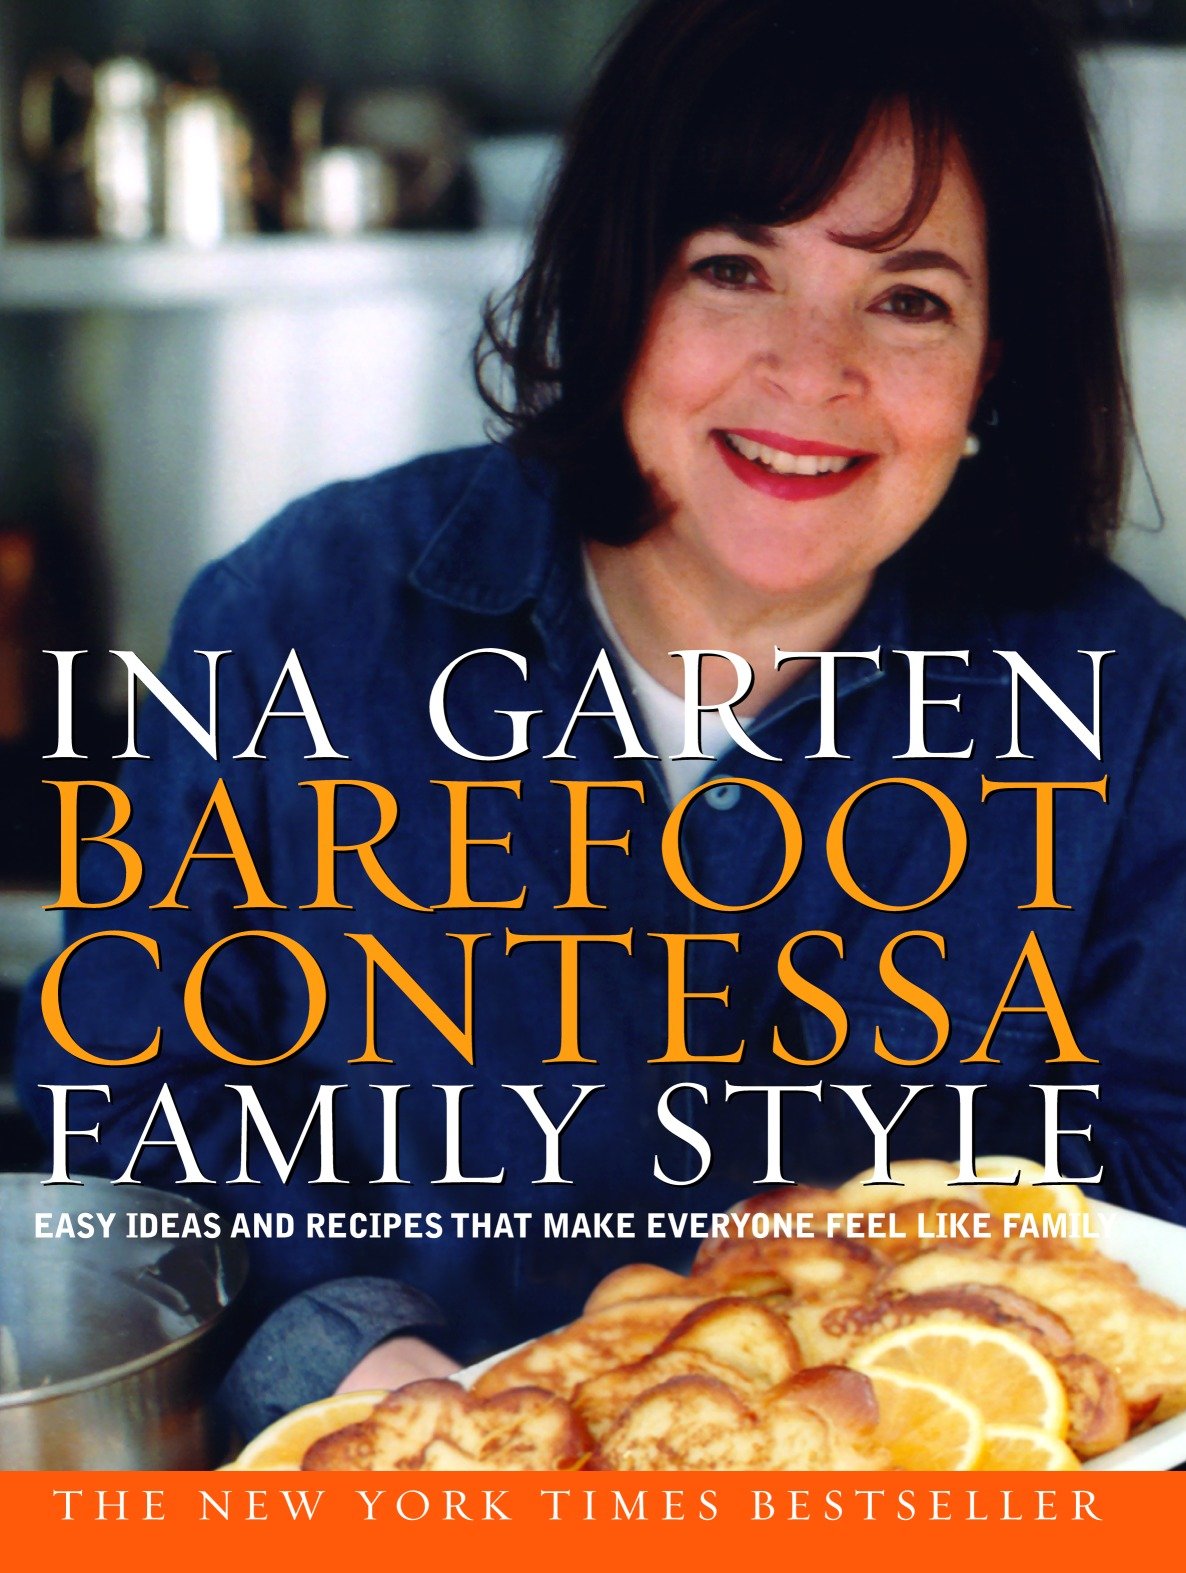 Barefoot Contessa family style easy Ideas and recipes that make everyone feel like family cover image